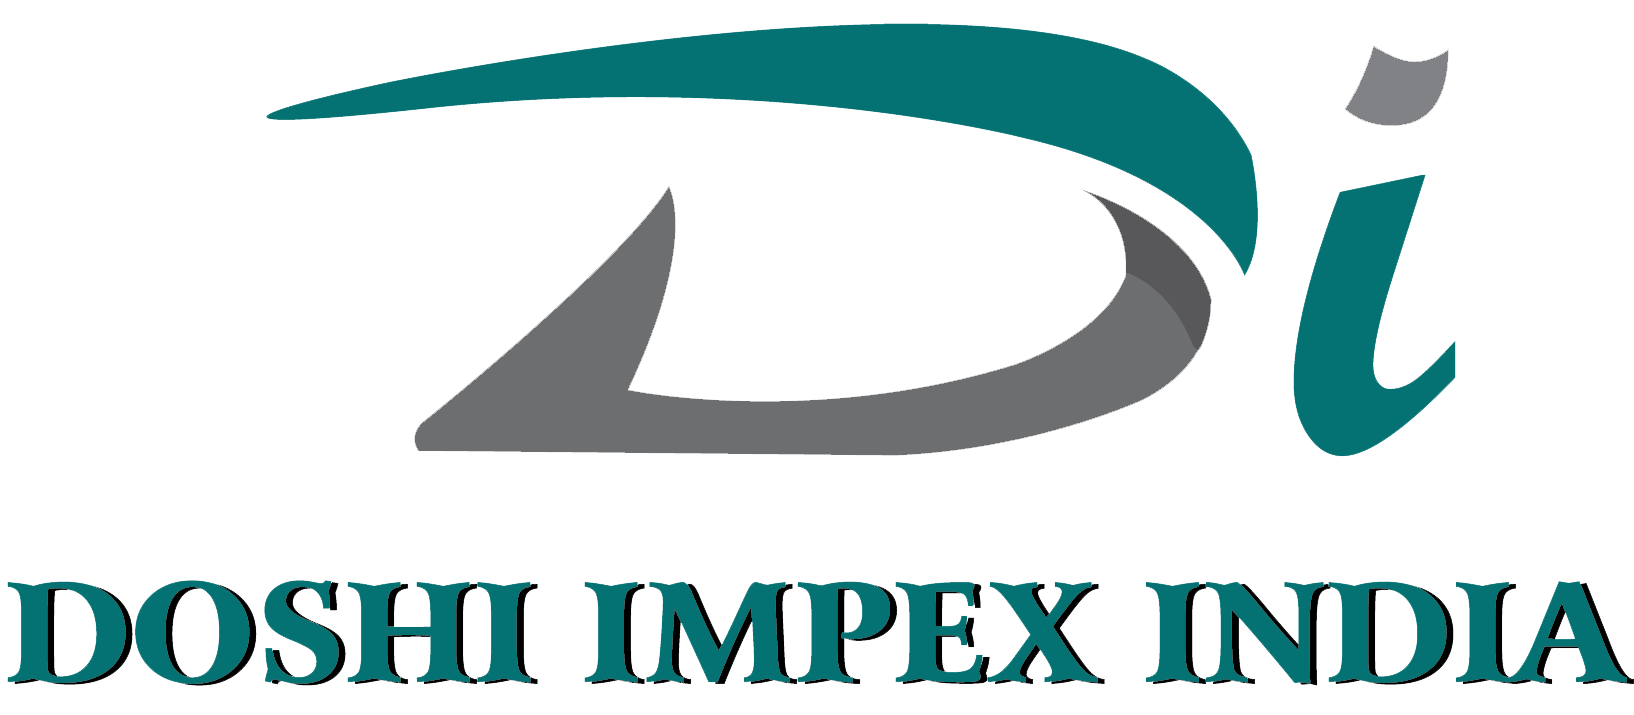 RAMDEV IMPEX, Bhuj - Manufacturer of CHINA CLAY and SILICA SAND in Gujarat,  India